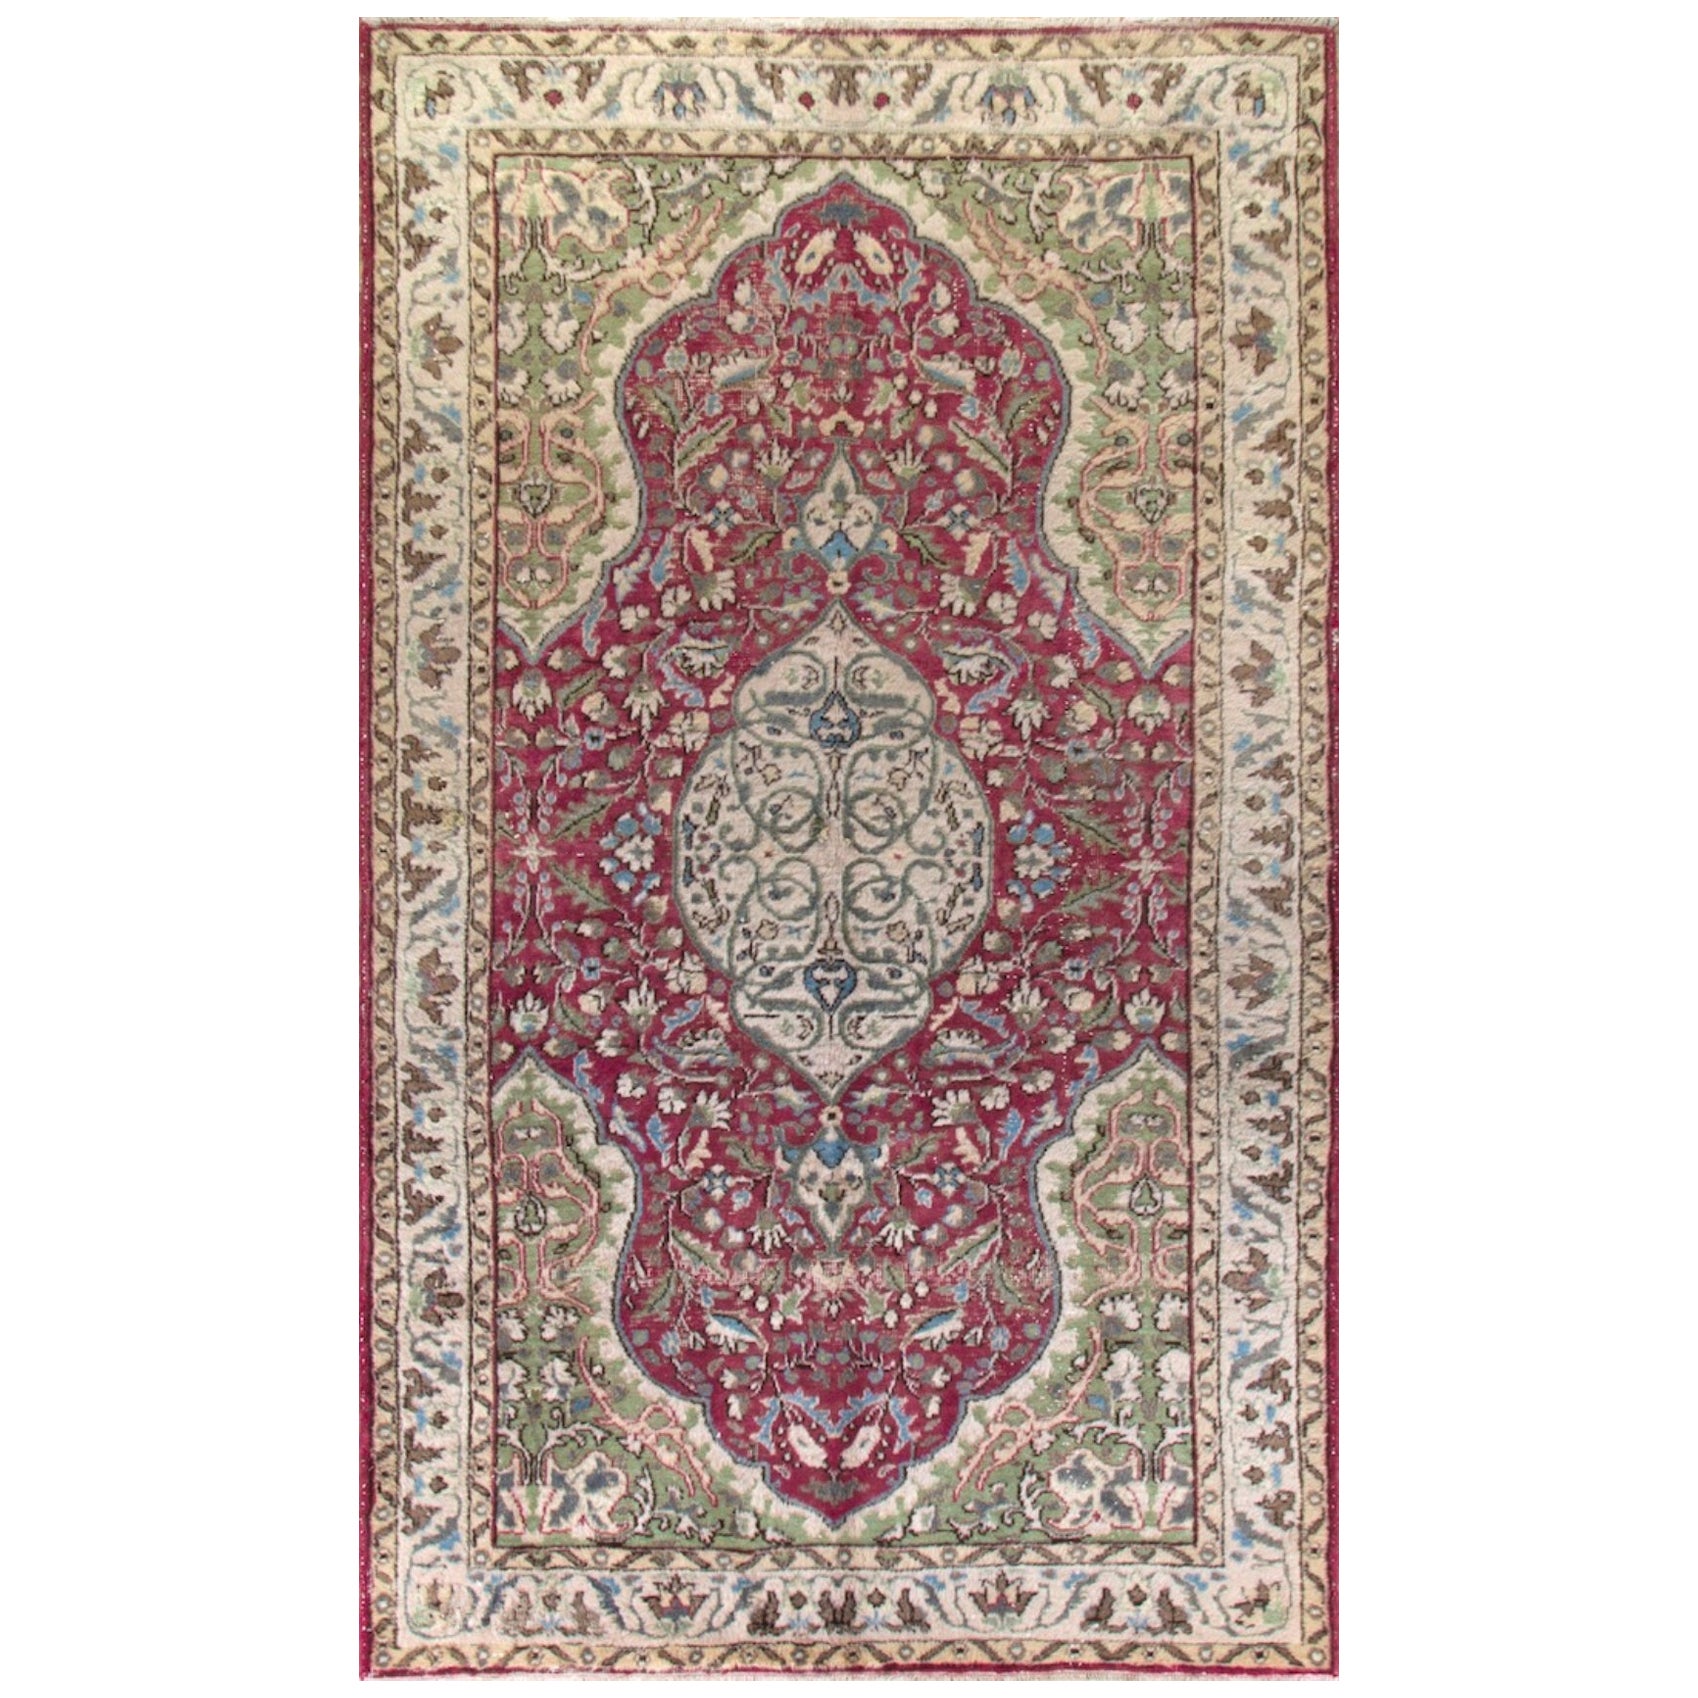 5.6x9.2 Ft Vintage Oriental Rug in Red and Green, Hand Knotted Wool Carpet For Sale